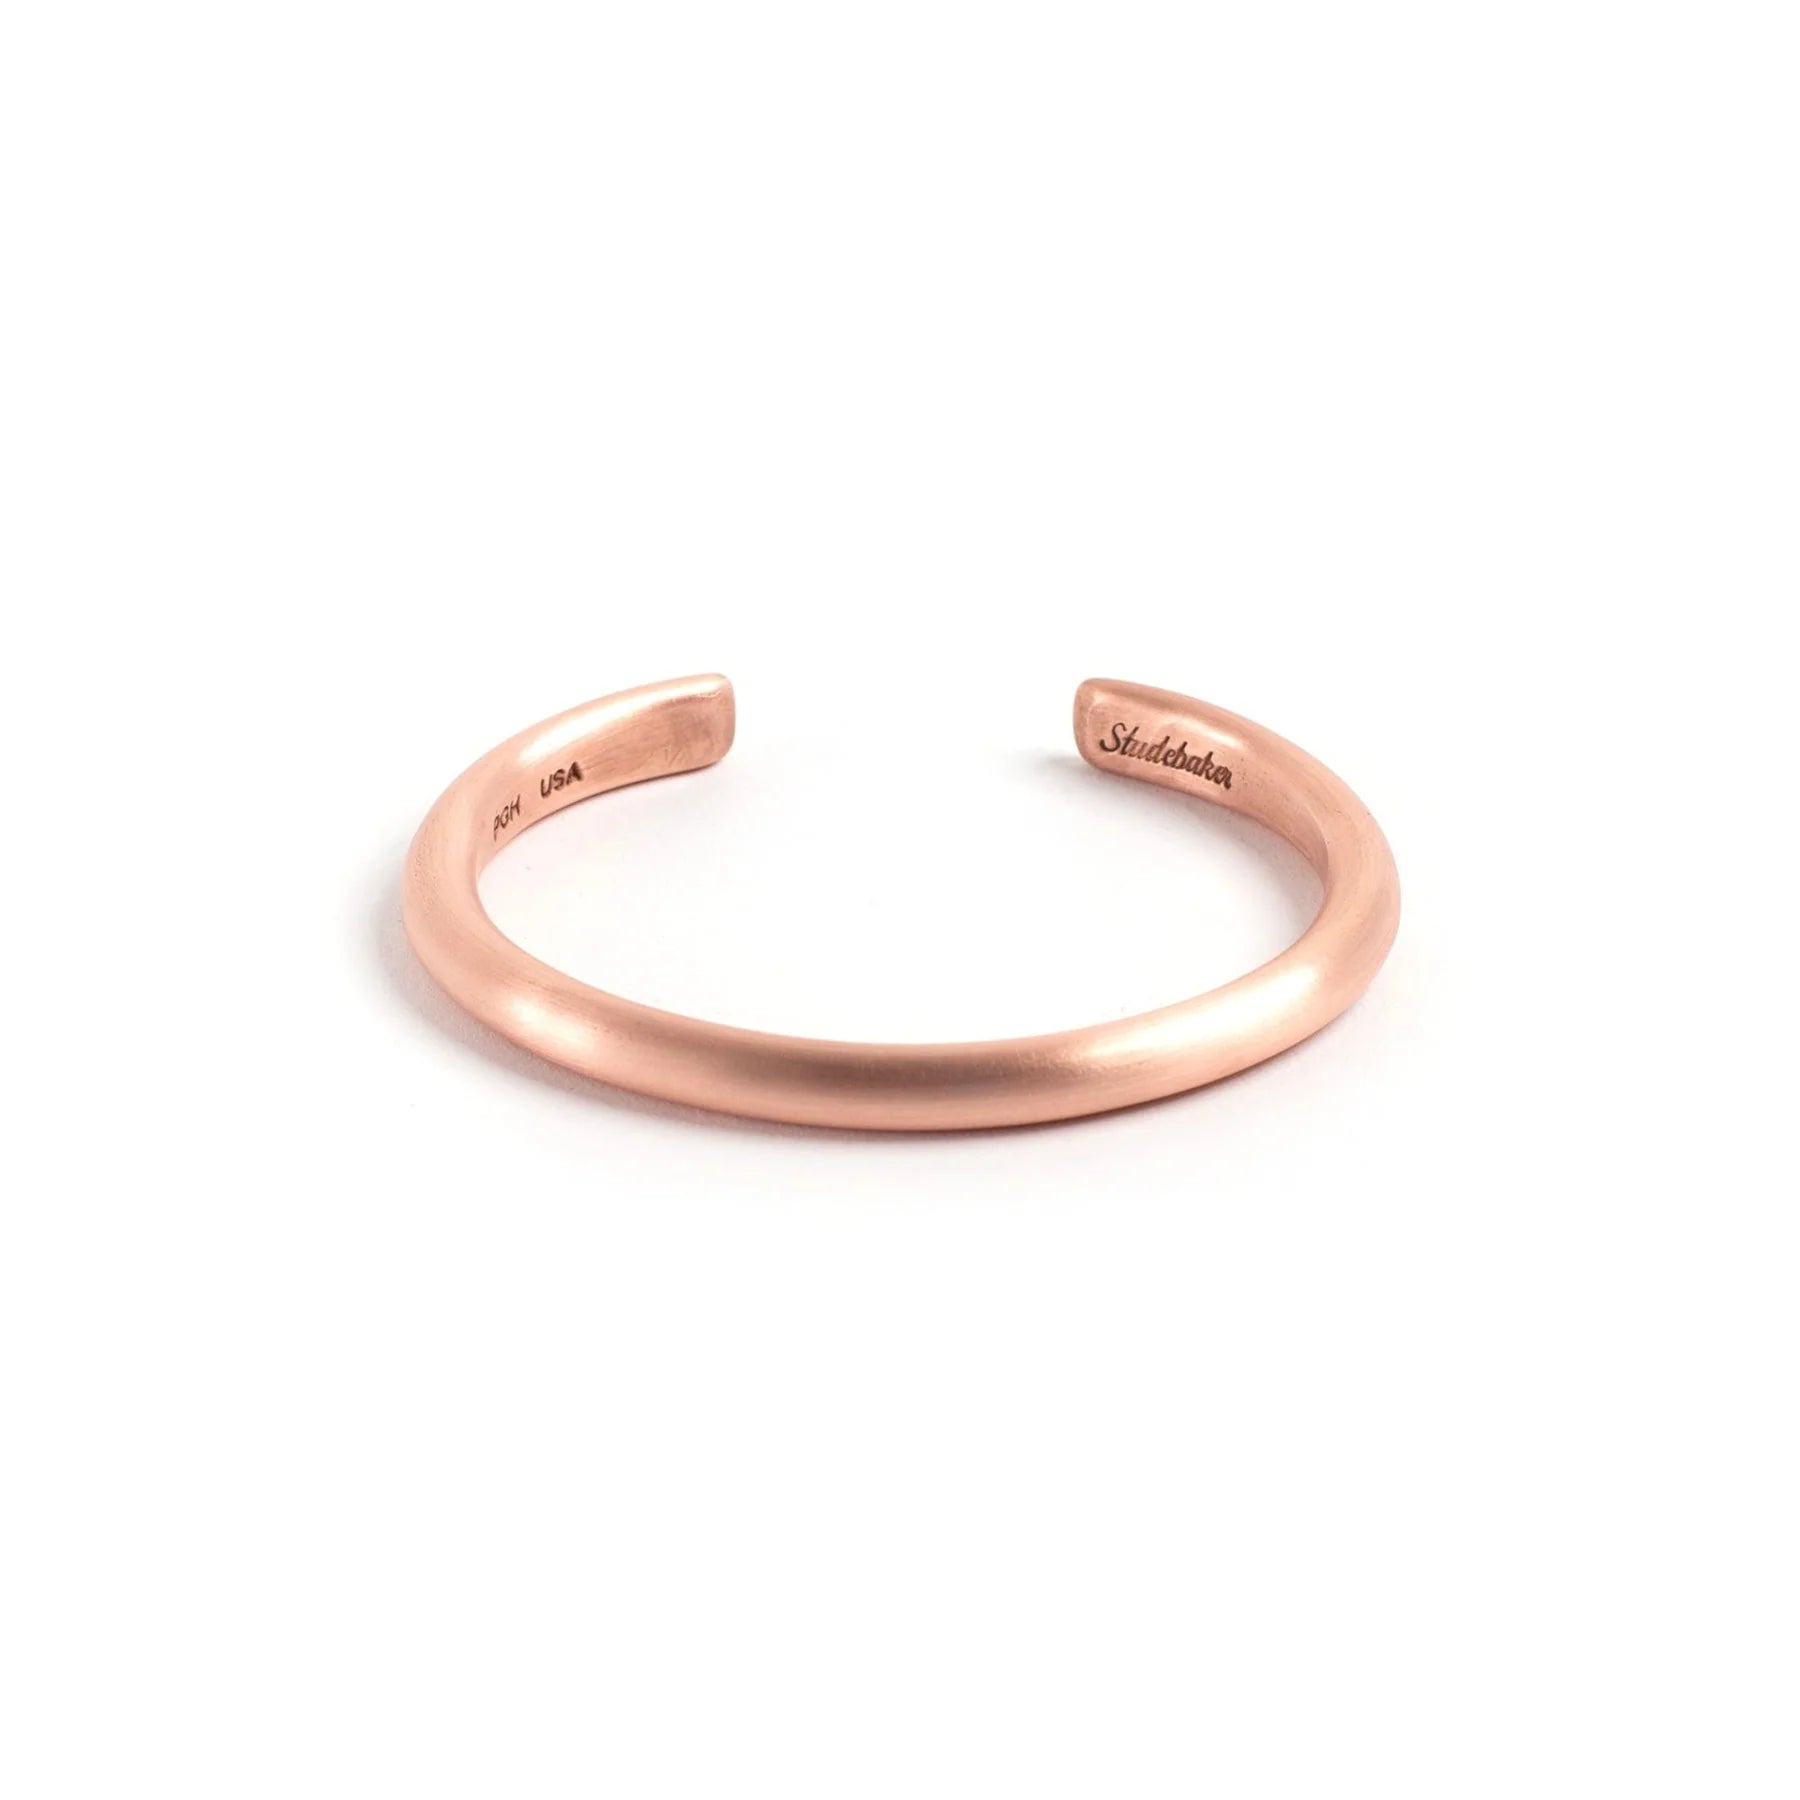 Studebaker - Heavyweight Champion Cuff - Large-Men&#39;s Accessories-Copper-Yaletown-Vancouver-Surrey-Canada